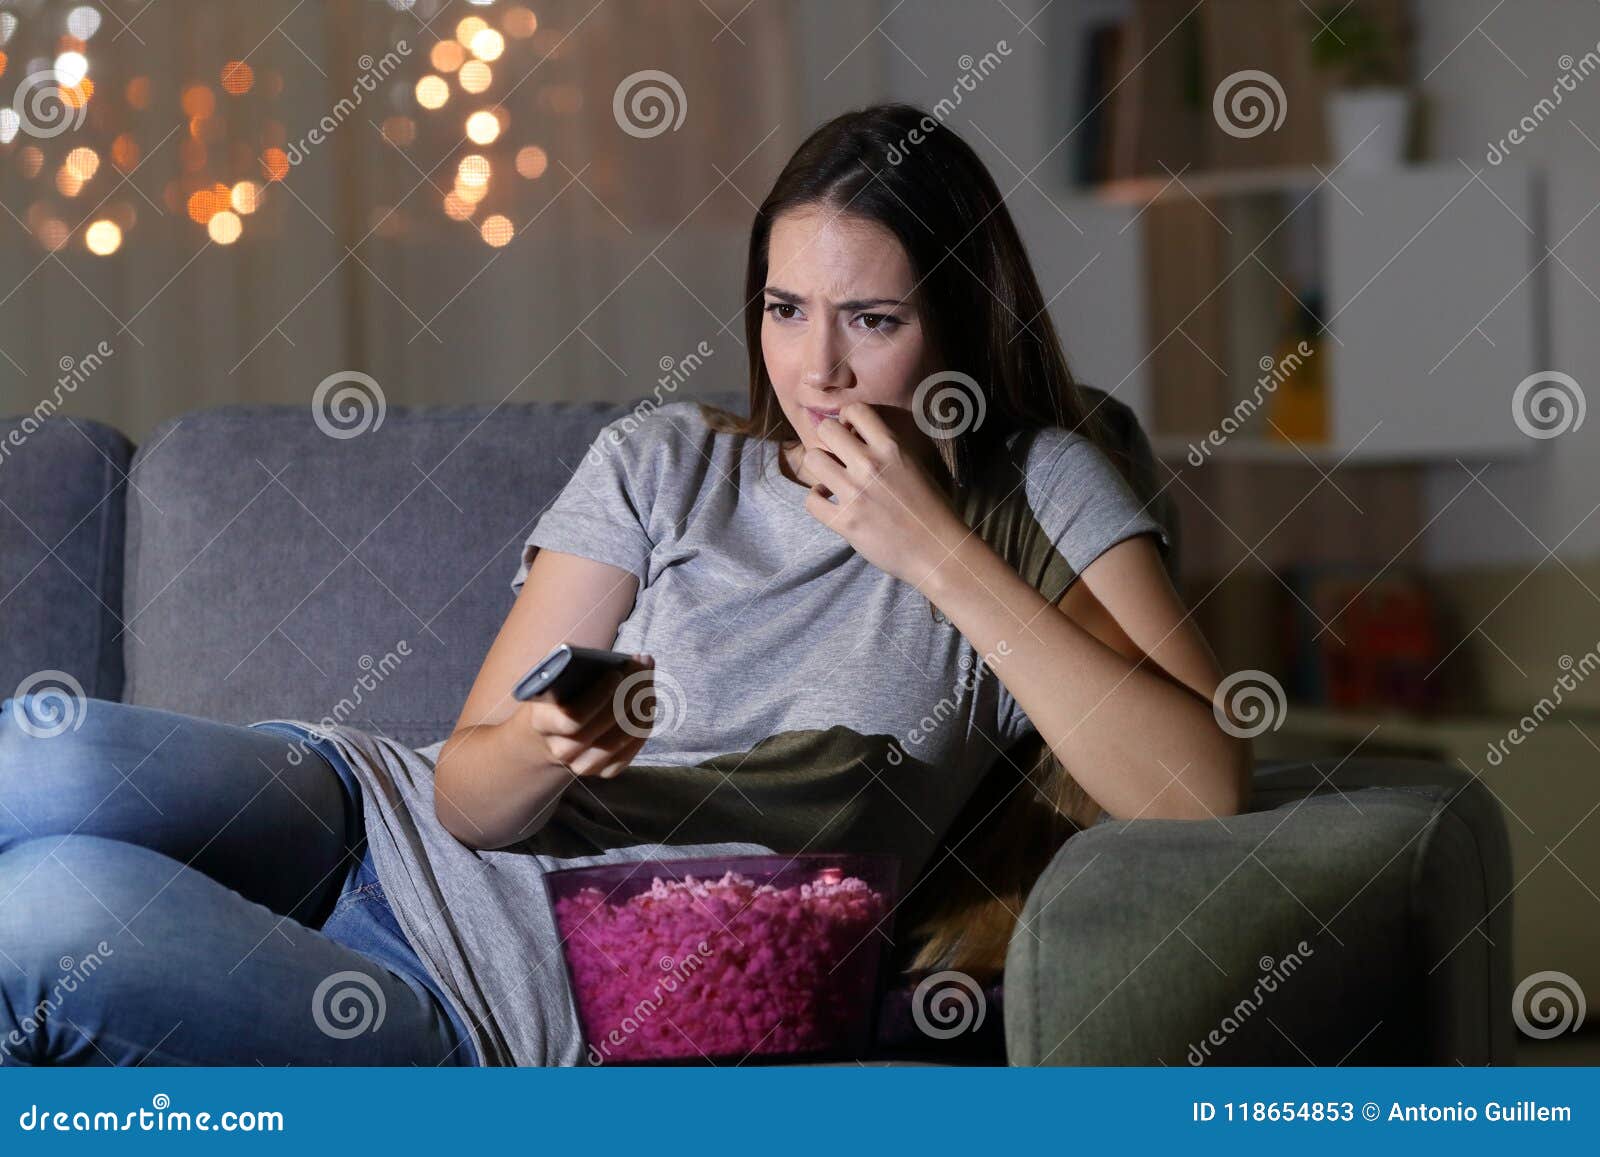 nervous spectator watching tv at home in the night